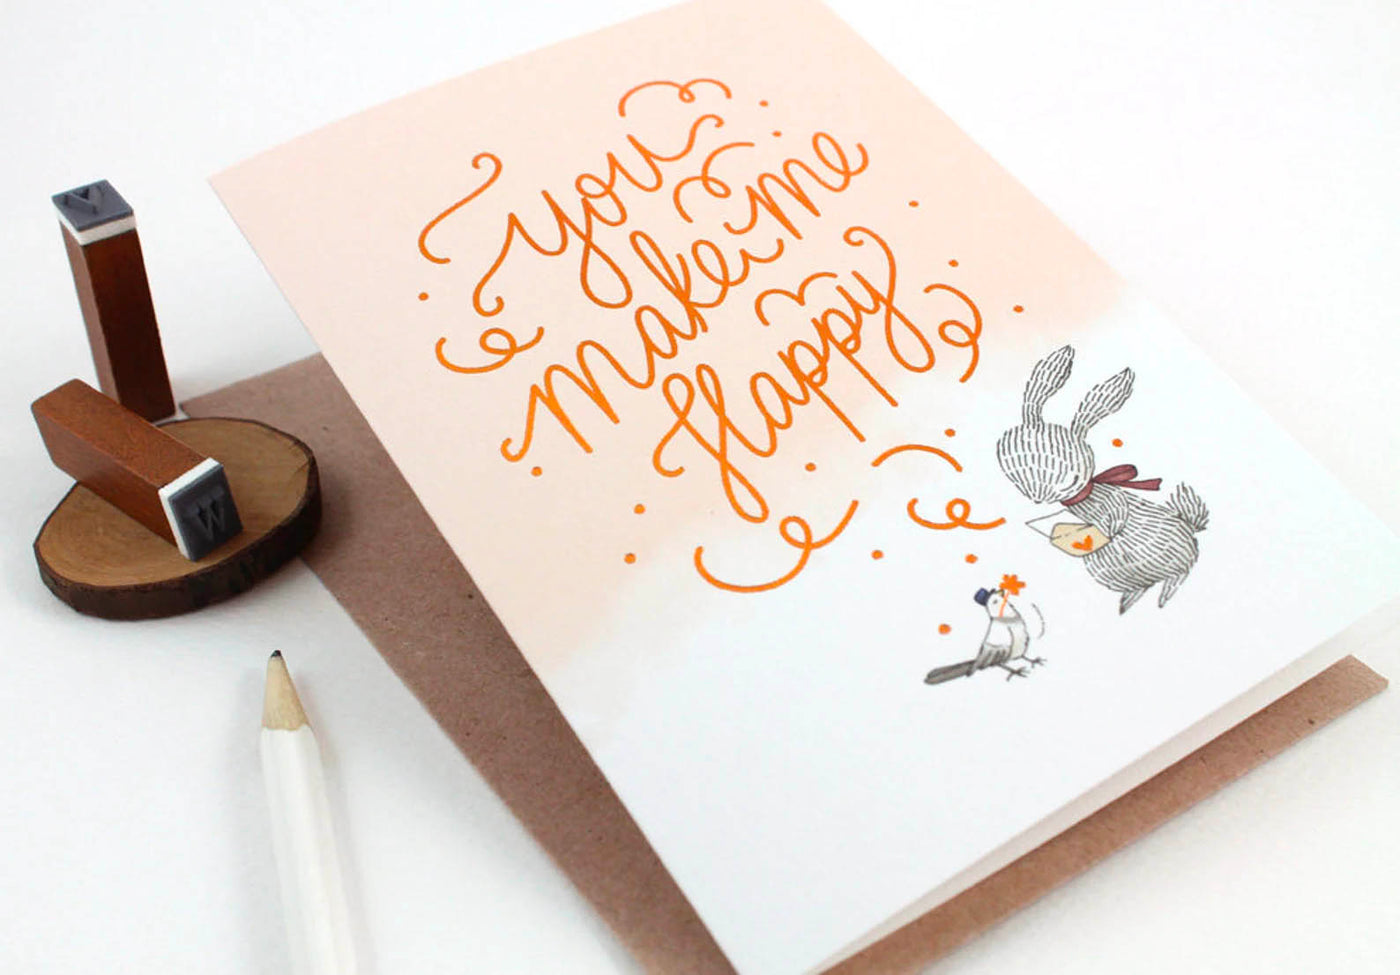 You Make Me Happy Card | Whimsy Whimsical | Friendship + Love